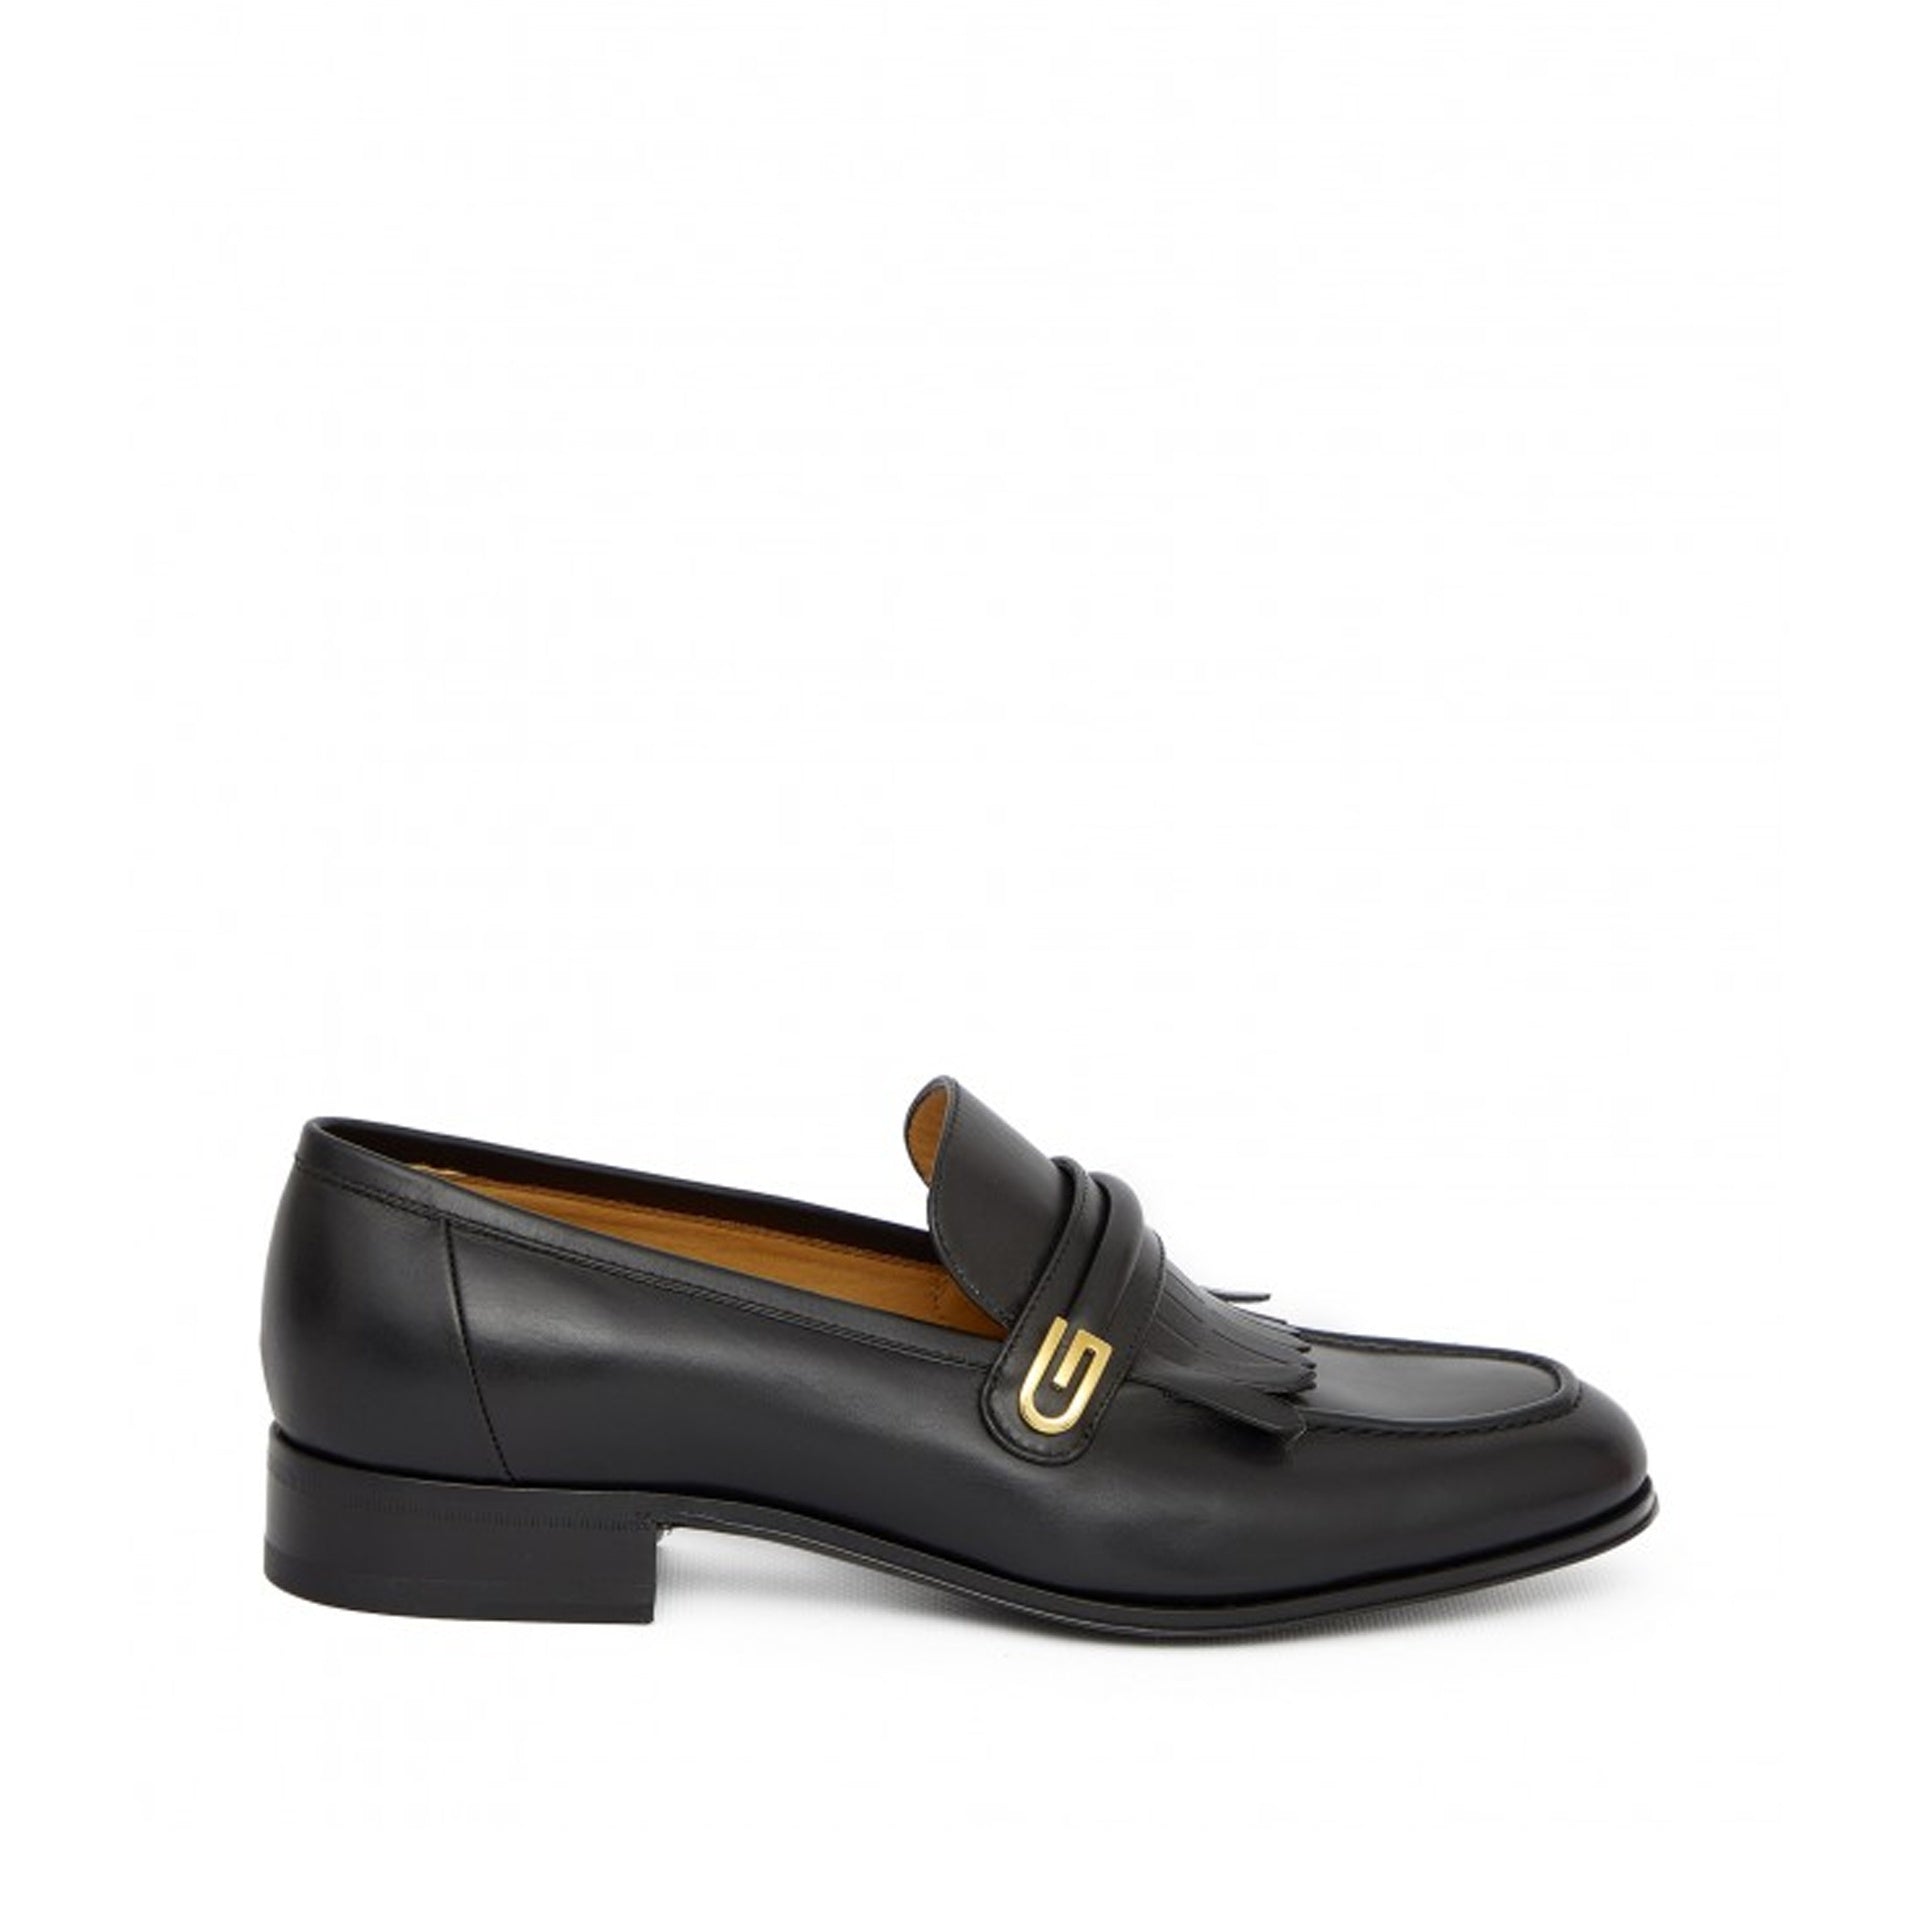 GUCCI_GUCCI_Leather_Loafers_714680_06F00_1000_Black_1.jpg